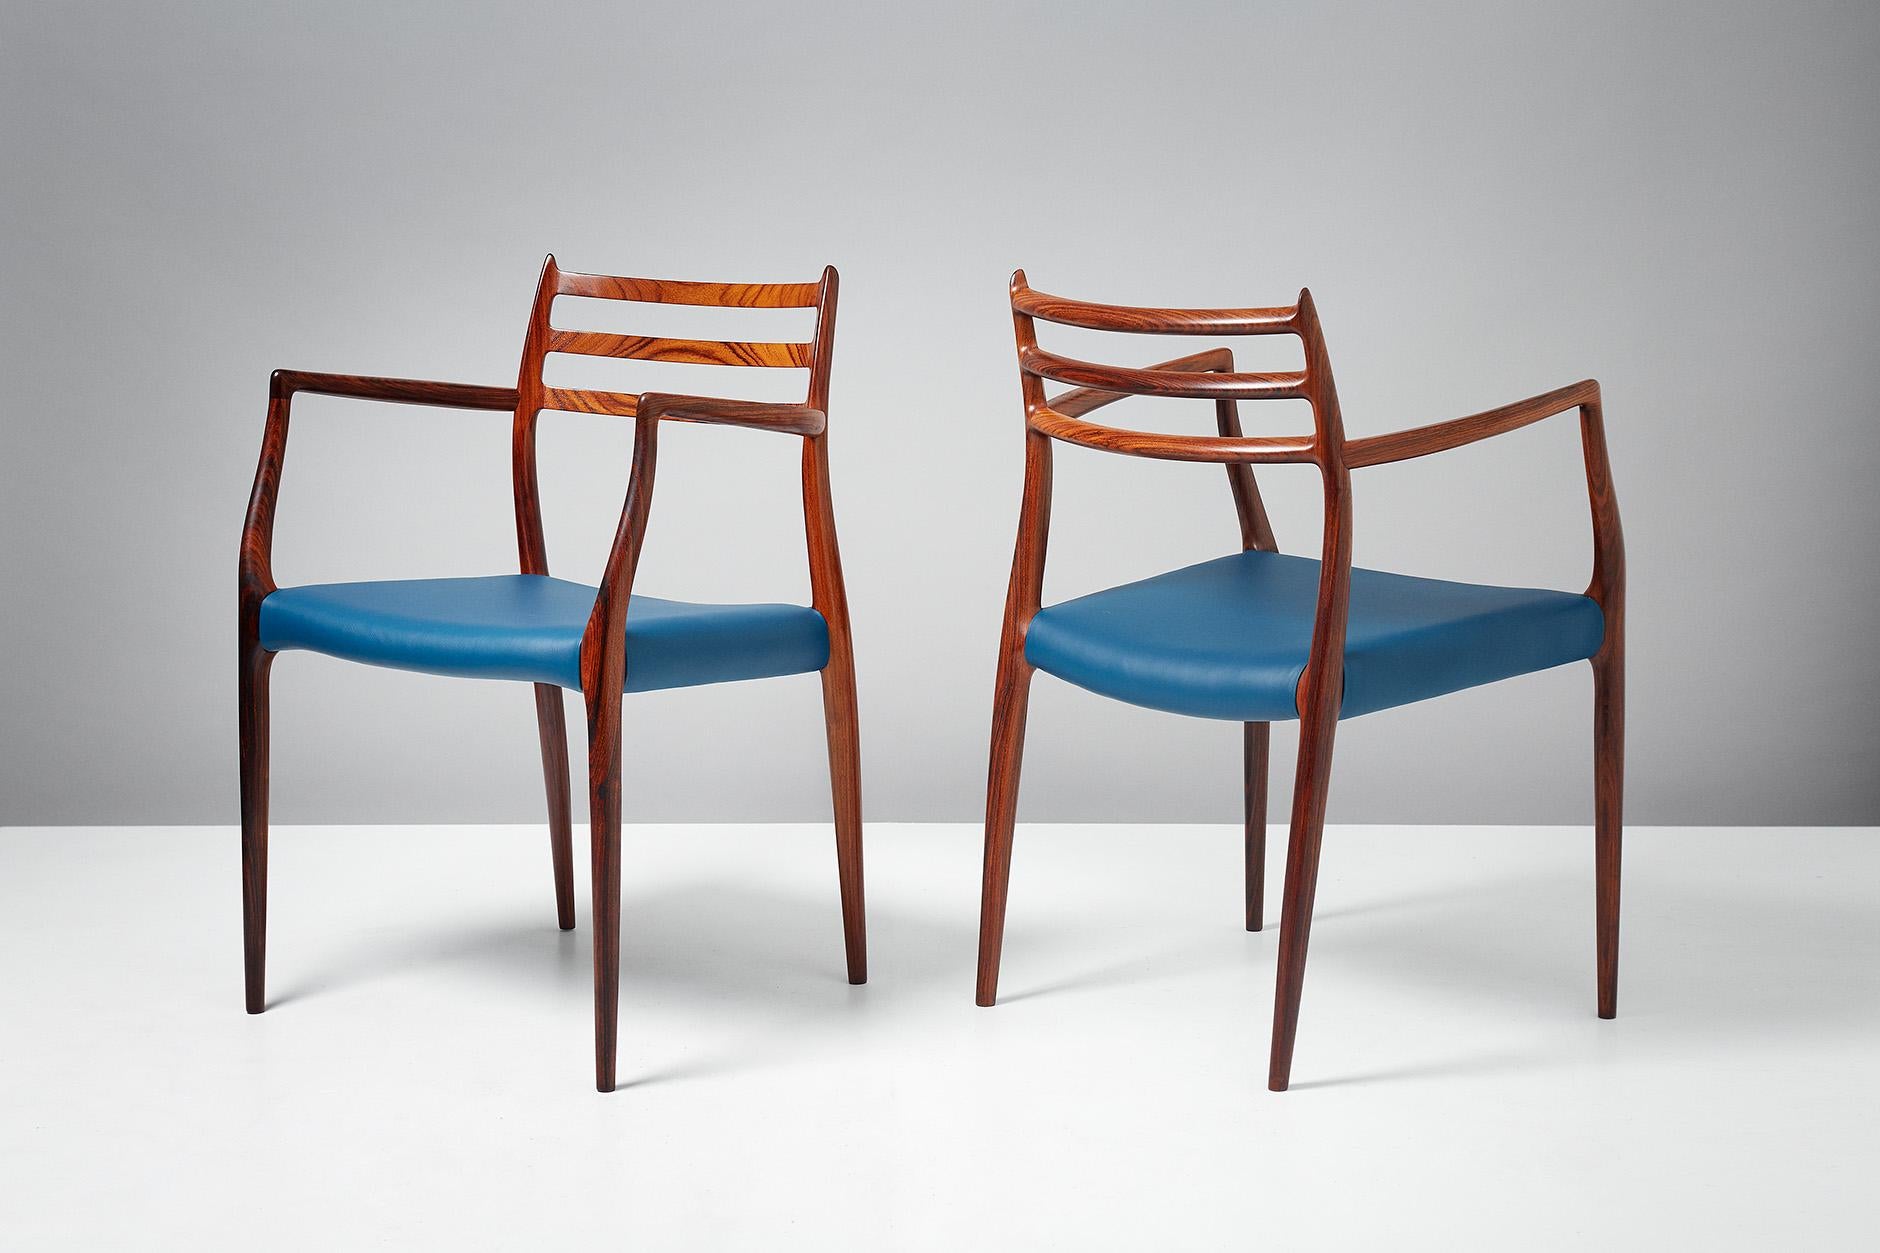 Niels Moller

Pair of model 62 armchairs, circa 1962

Rosewood armchairs designed by Niels Moller for J.L. Moller Mobelfabrik, Denmark, 1962 with new majolica blue leather seats. These examples are early productions featuring more slender frames